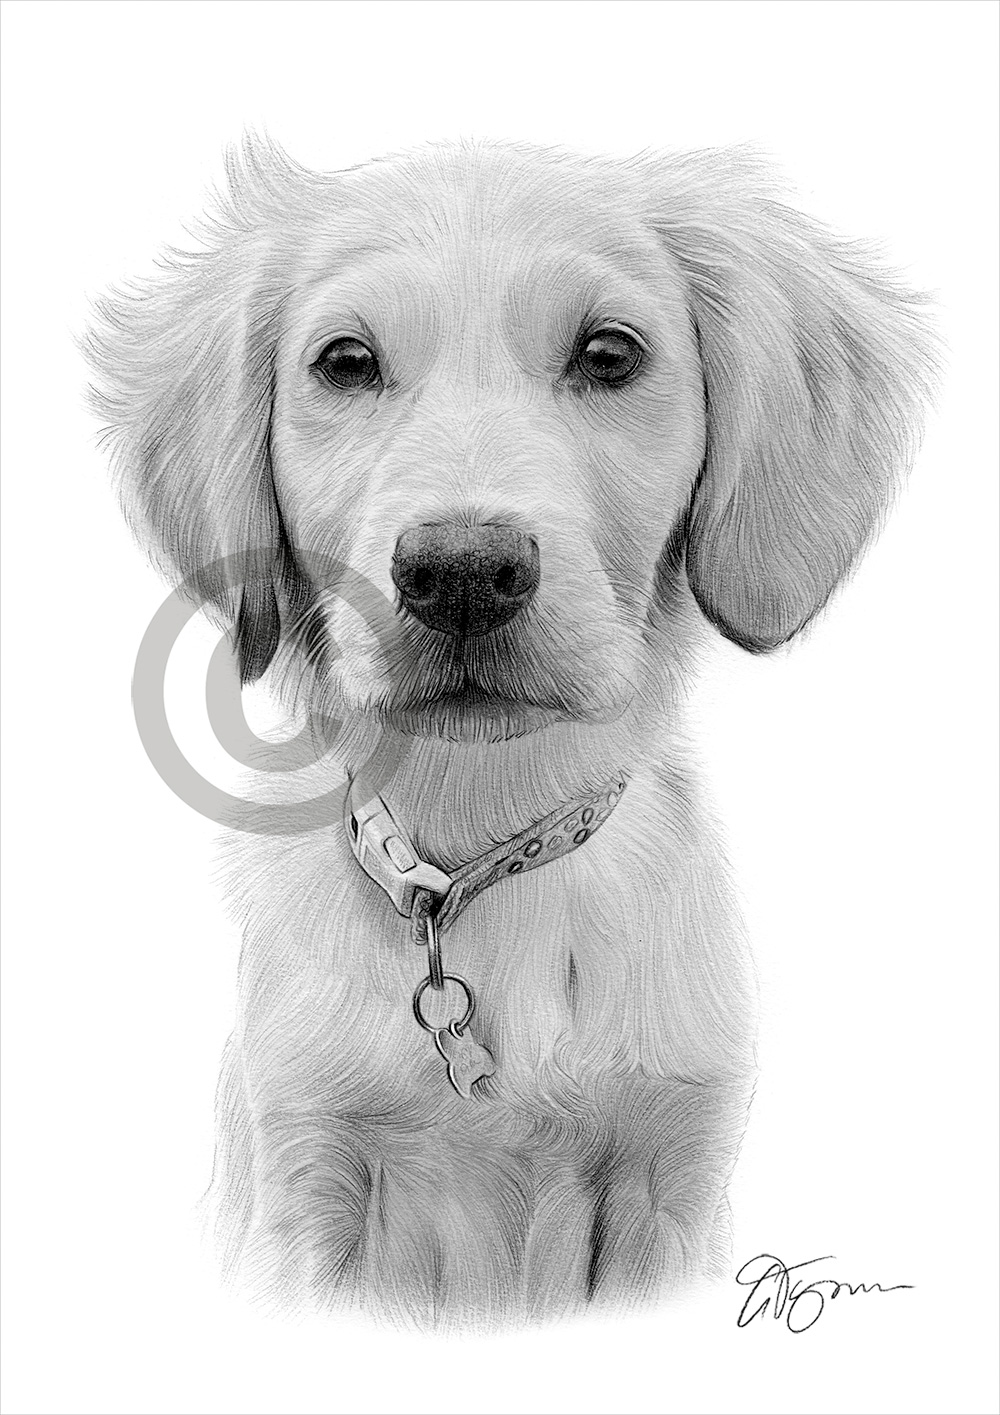 Pencil drawing commission of a labrador puppy by artist Gary Tymon